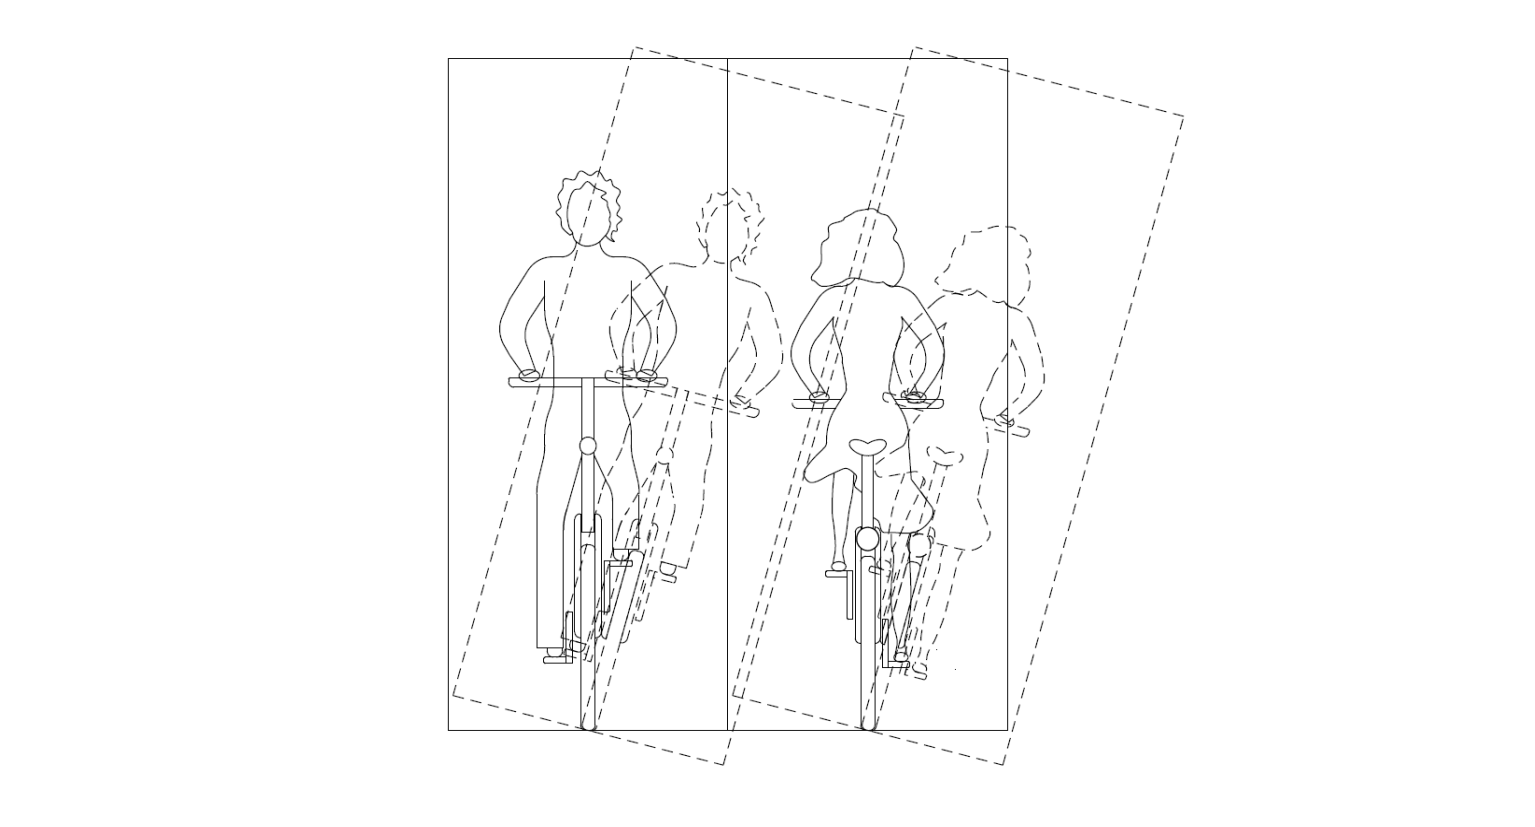 Fig. 1. Outlines of a space used by bicycle riders at a curve in the plan.